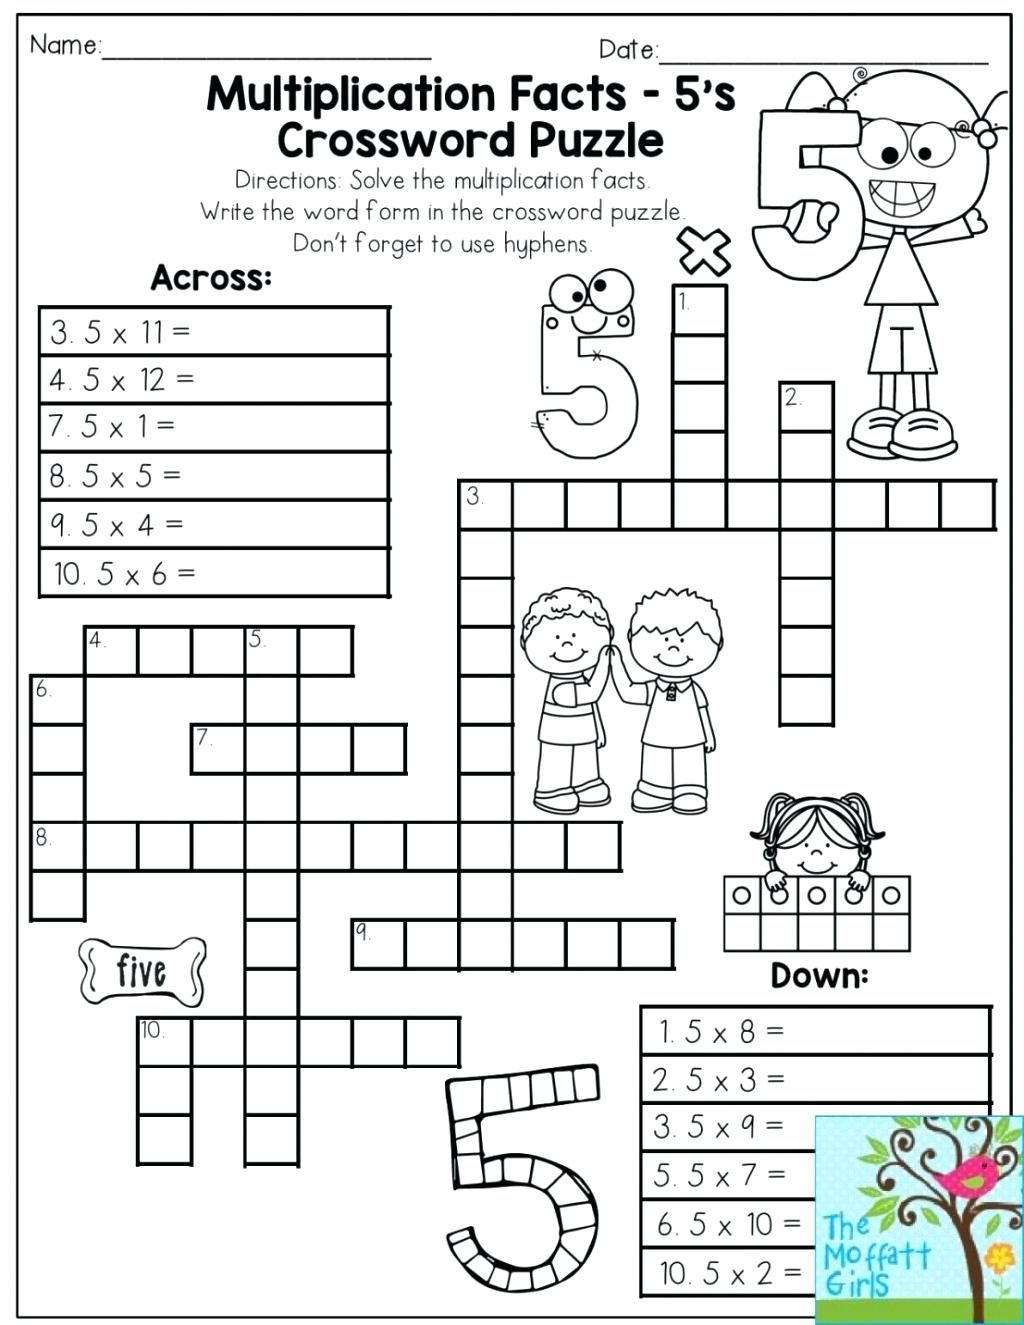 Printable Math Puzzles 5Th Grade Maths Ksheets Middle School Pdf Fun - Printable Math Puzzles For High School